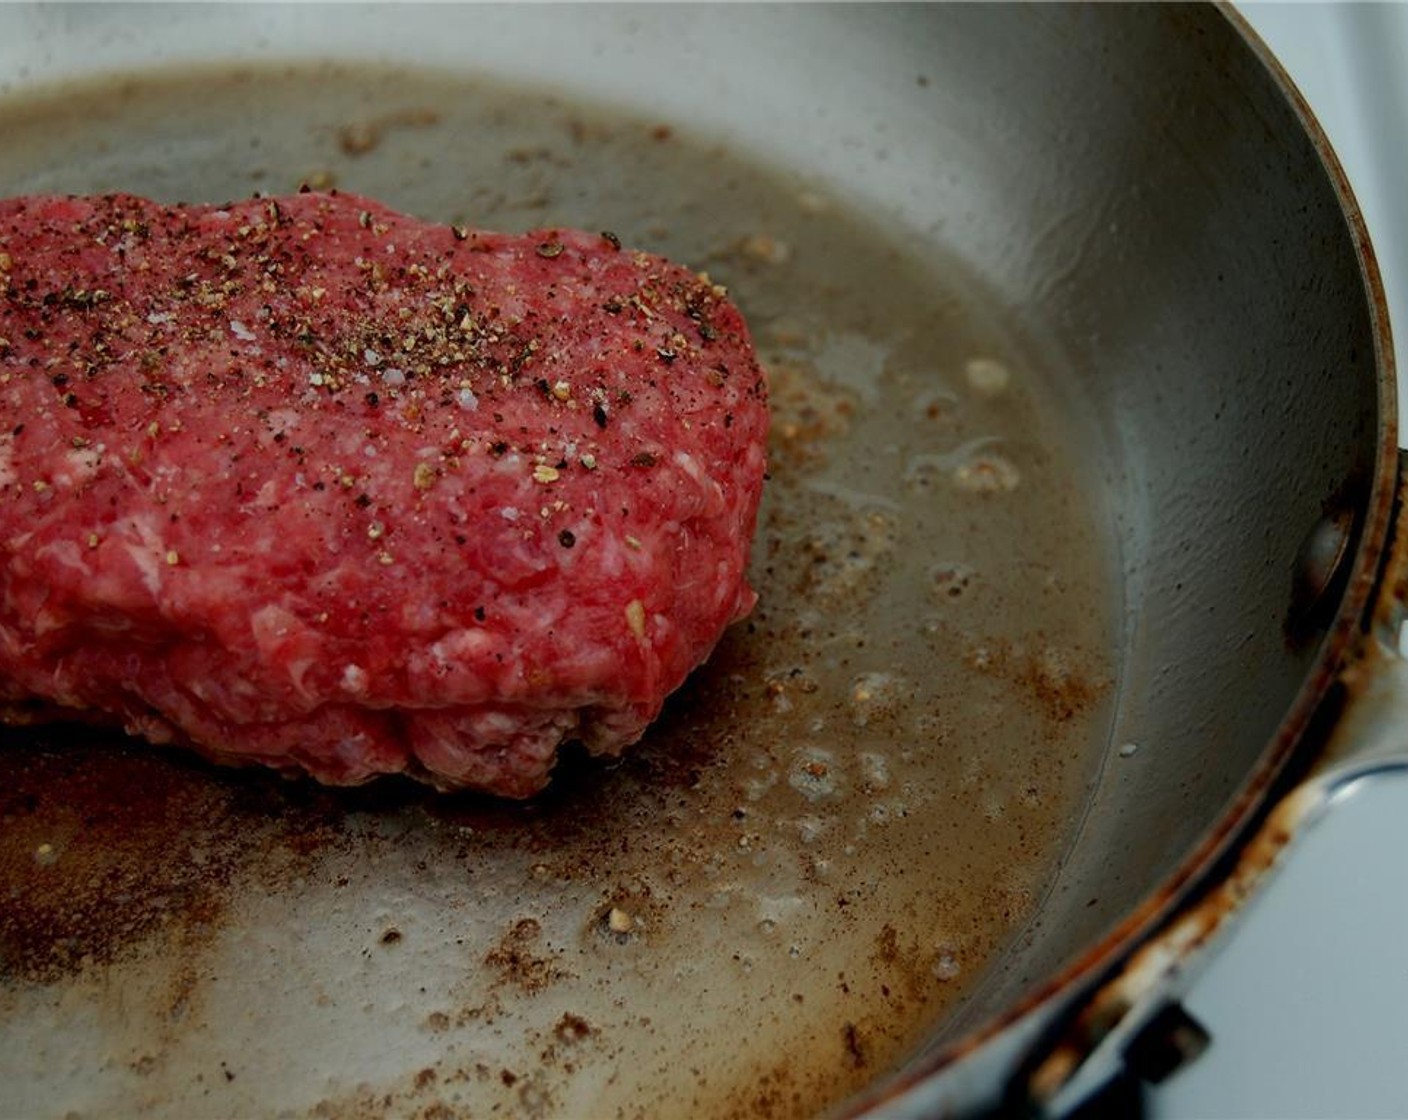 step 1 Make two burger patties out of the Ground Beef (6 oz). Make a well into one of the patties, add the Garlic (1 clove), Blue Cheese (1/2 cup) and Smoked Bacon (2 pieces). Put the second patty on top and seal it.